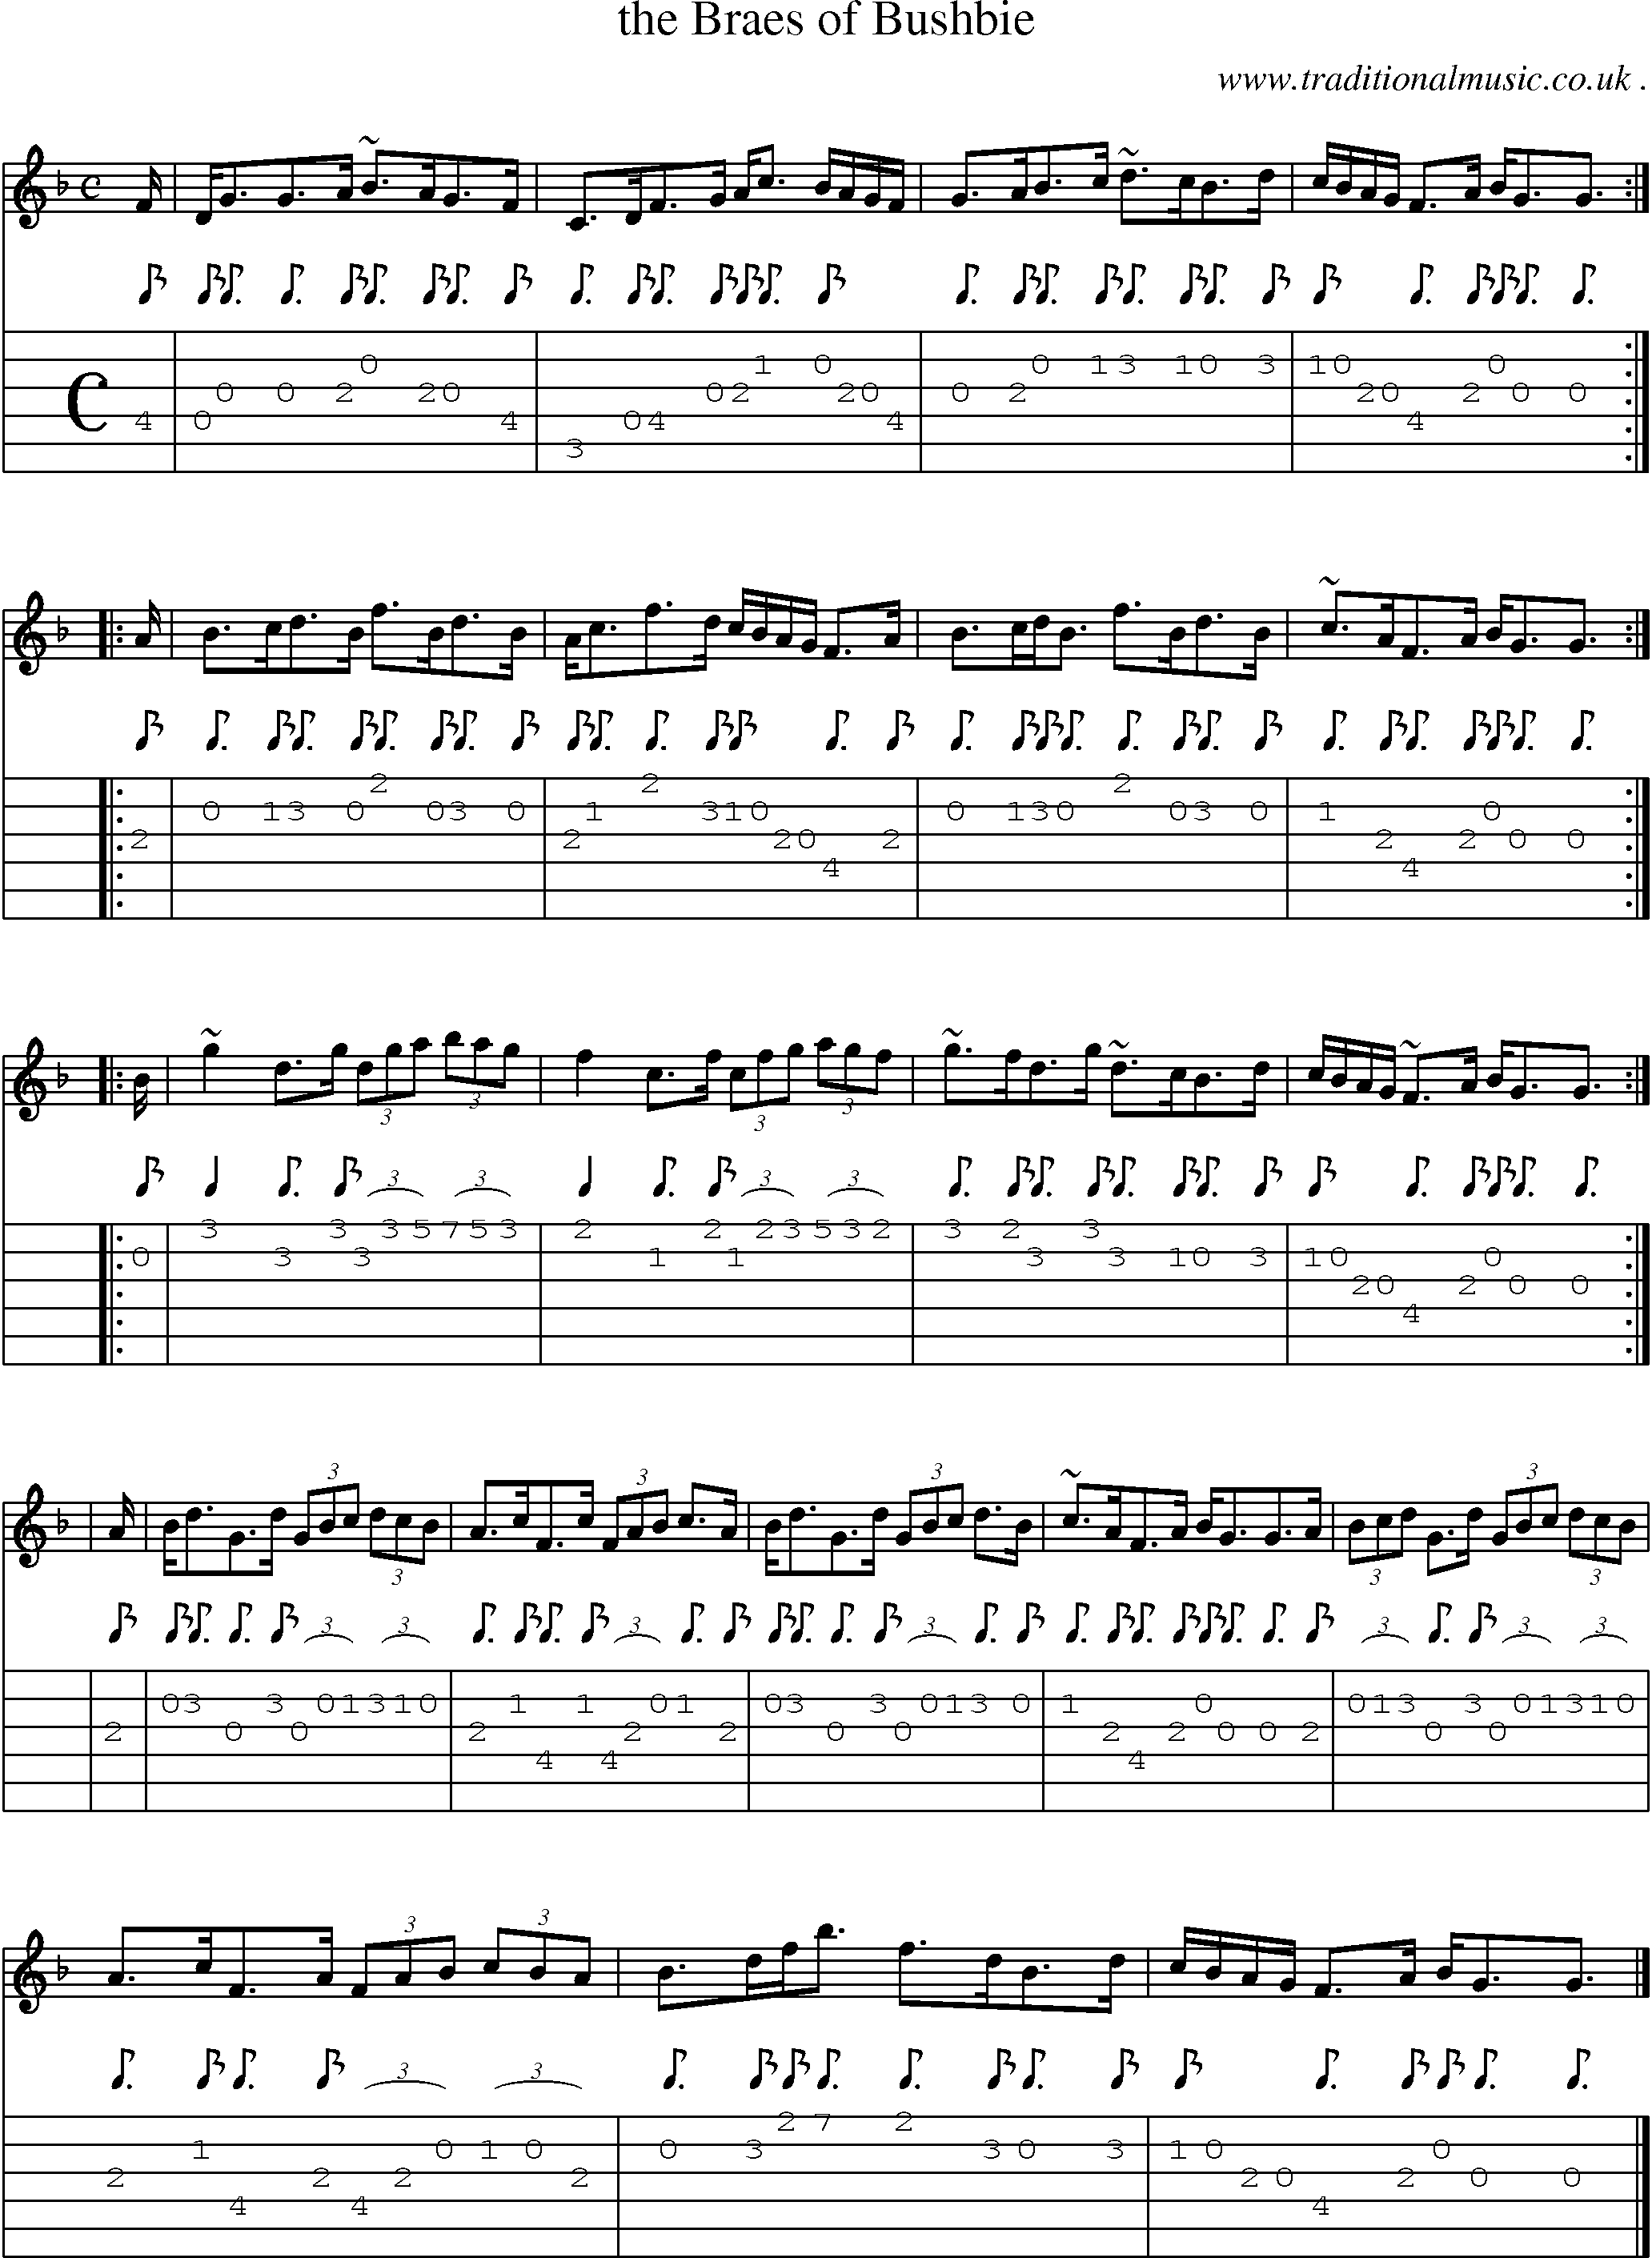 Sheet-music  score, Chords and Guitar Tabs for The Braes Of Bushbie